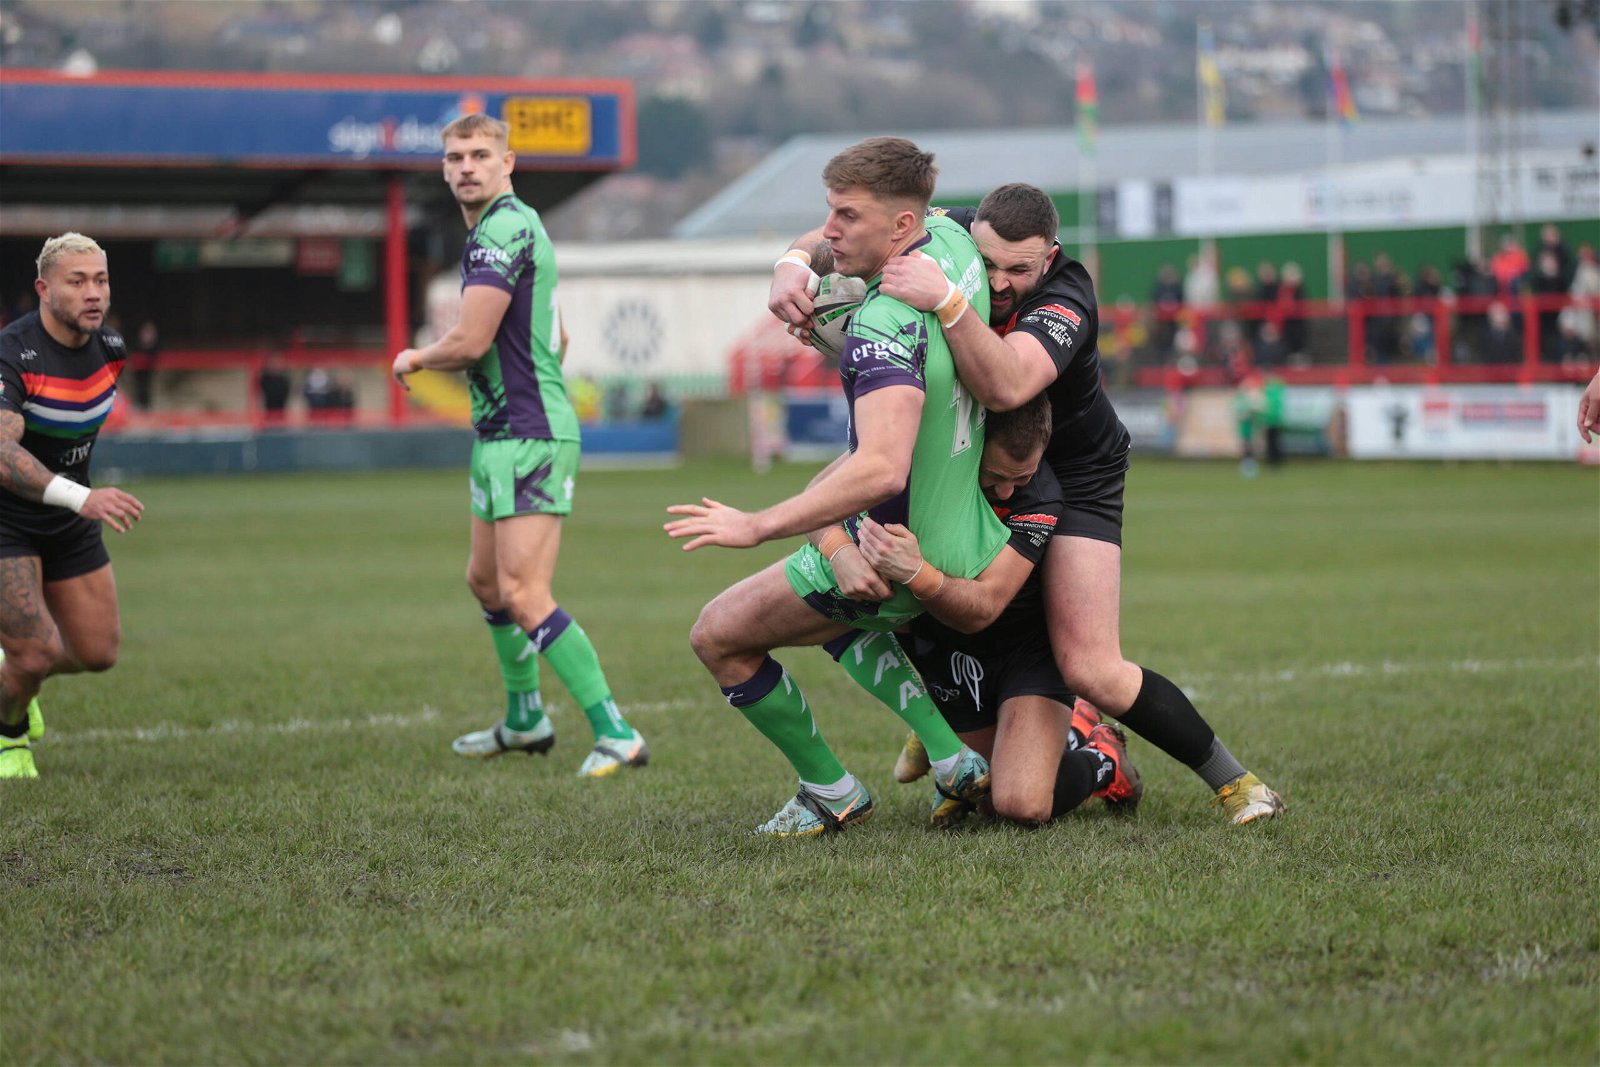 Keighley Cougars vs Castleford Tigers